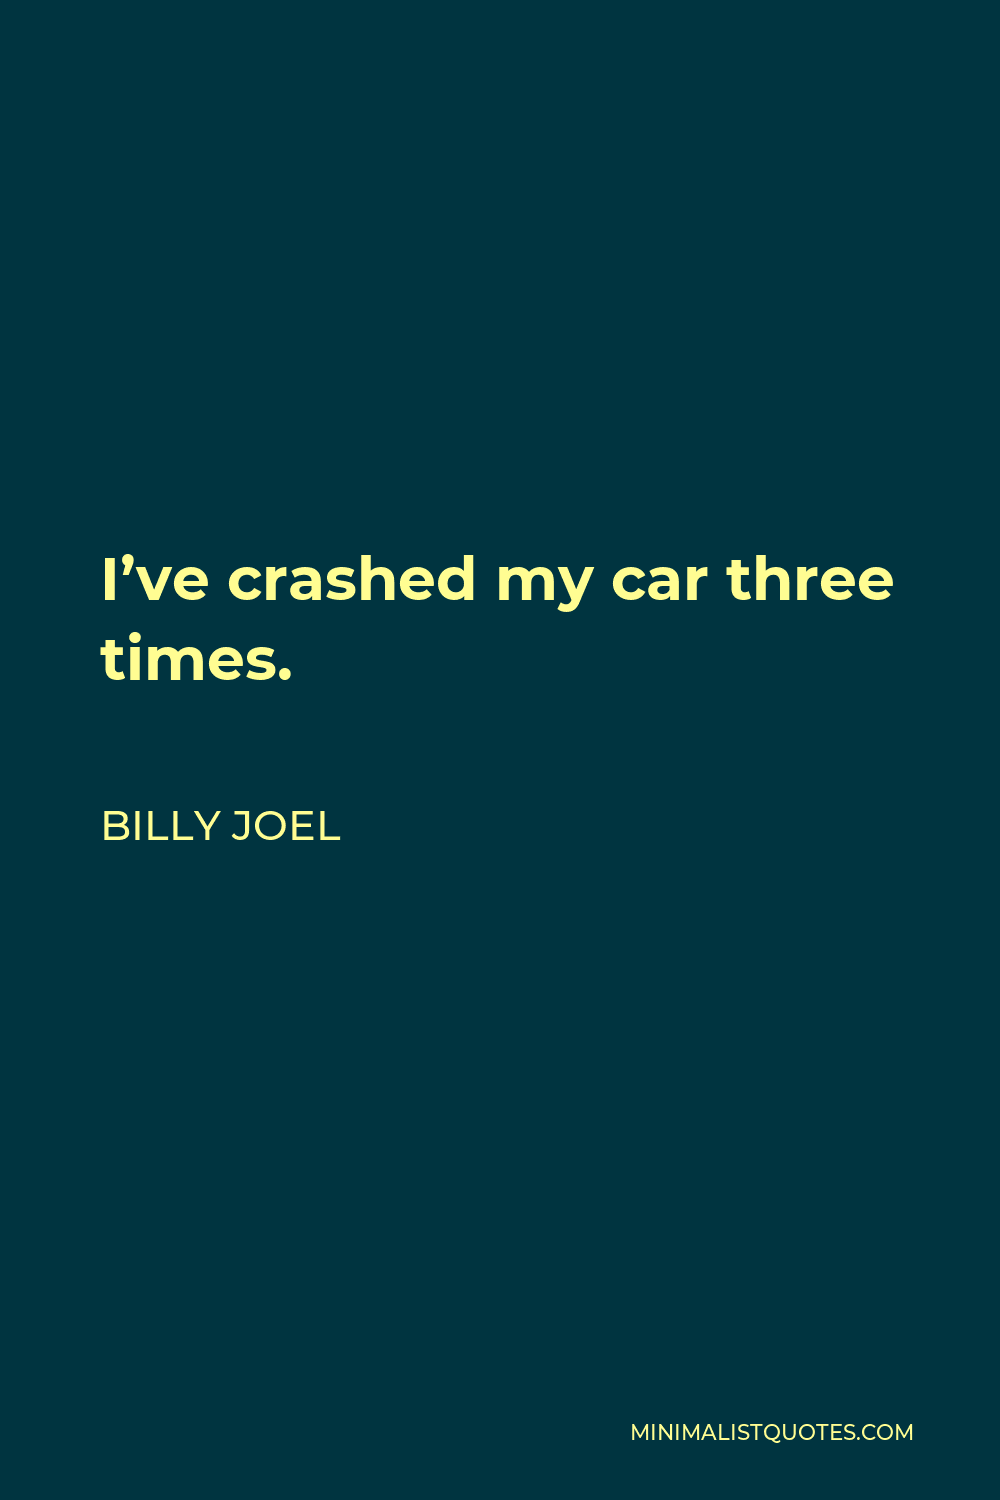 Billy Joel Quote - I’ve crashed my car three times.